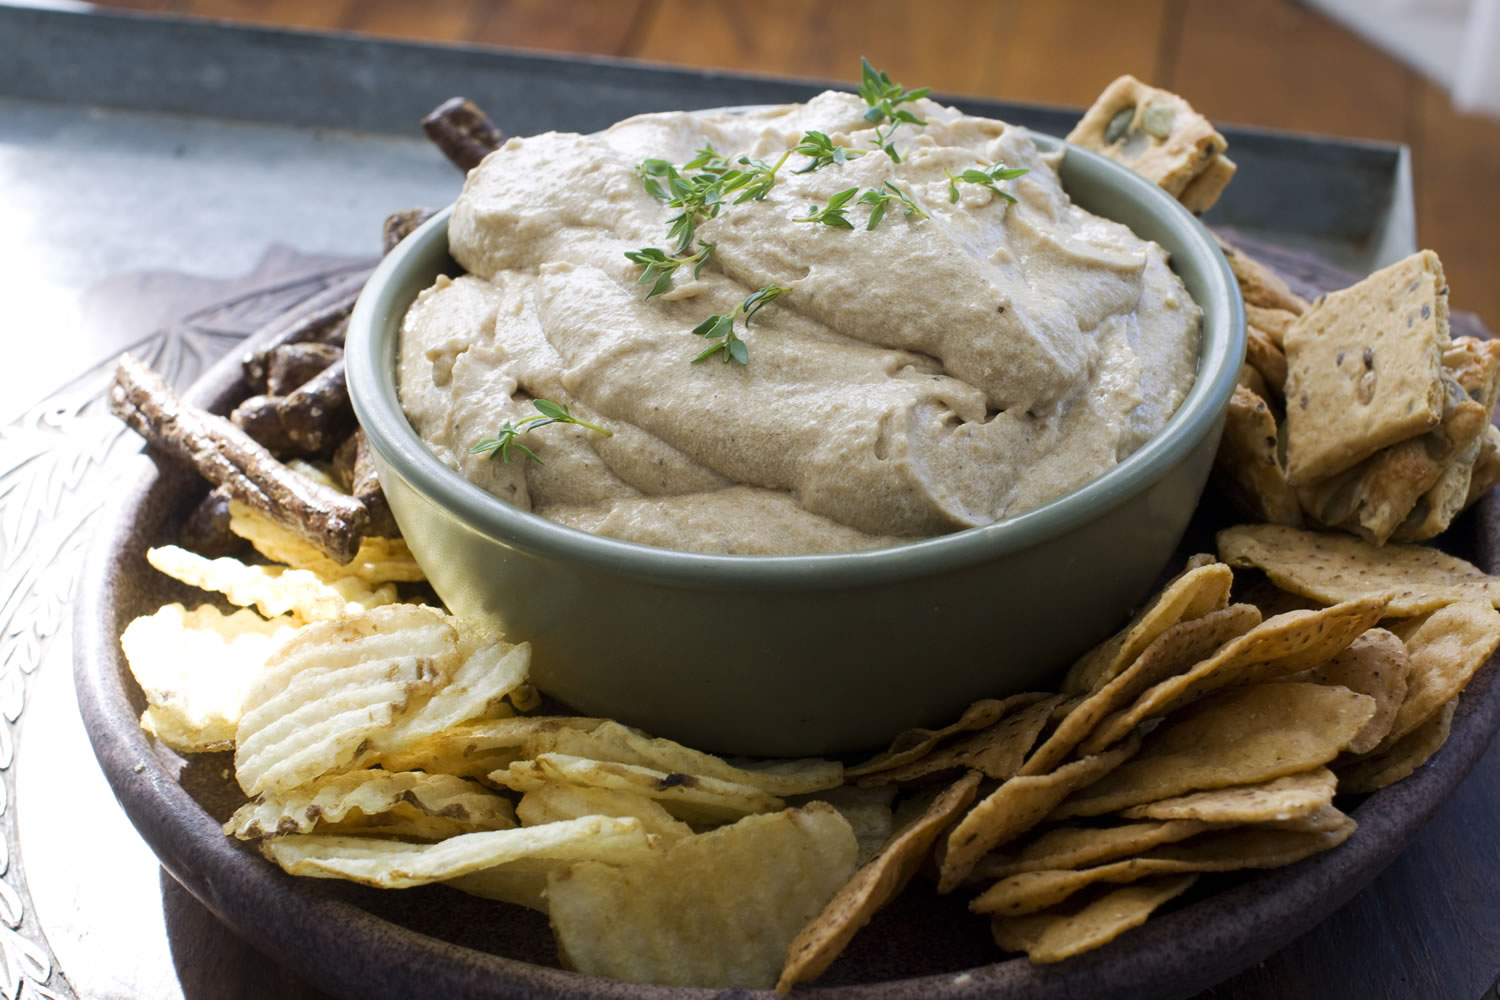 Carmelized Onion and Guinness Dip.